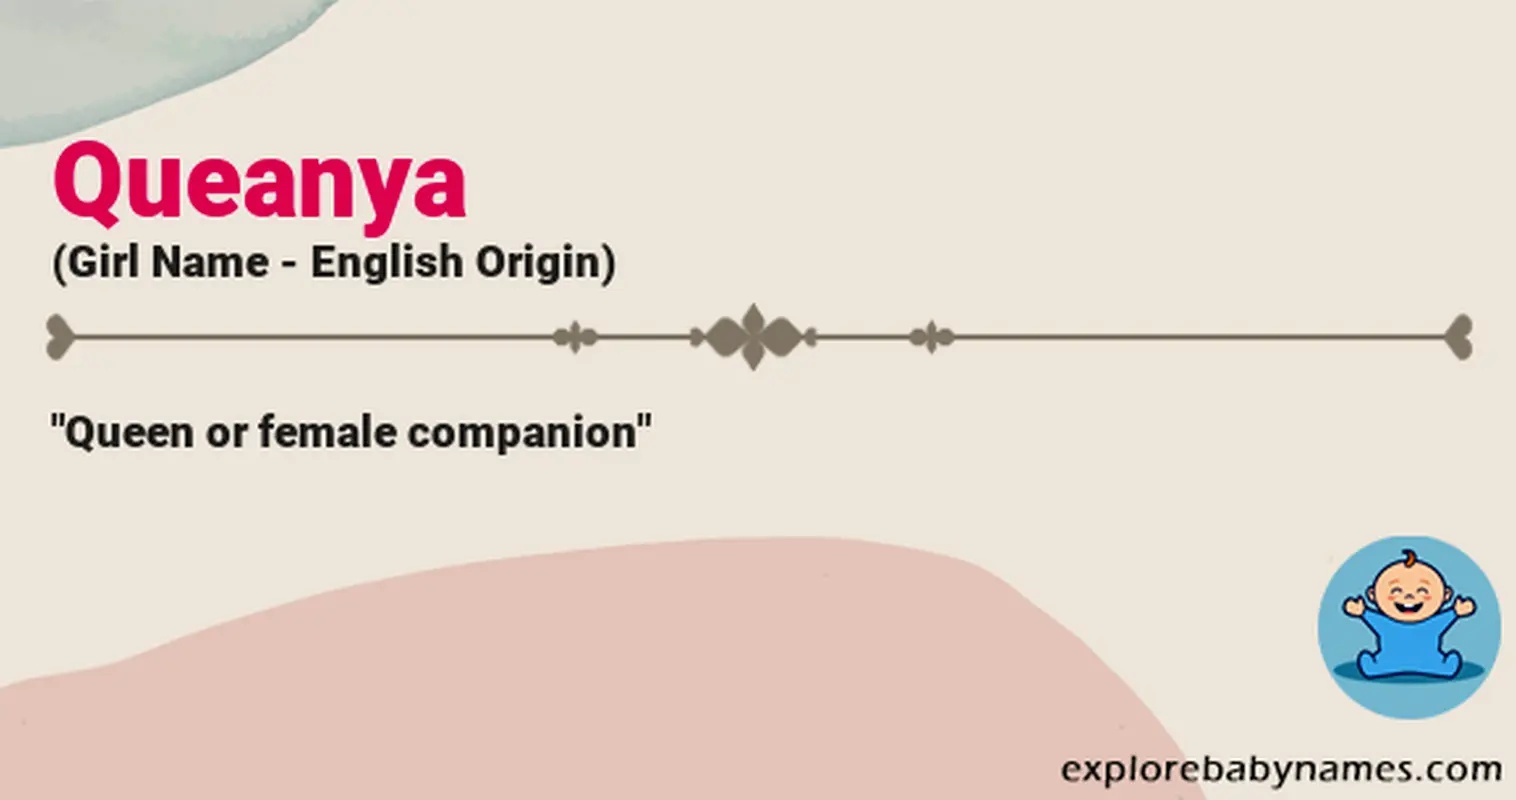 Meaning of Queanya